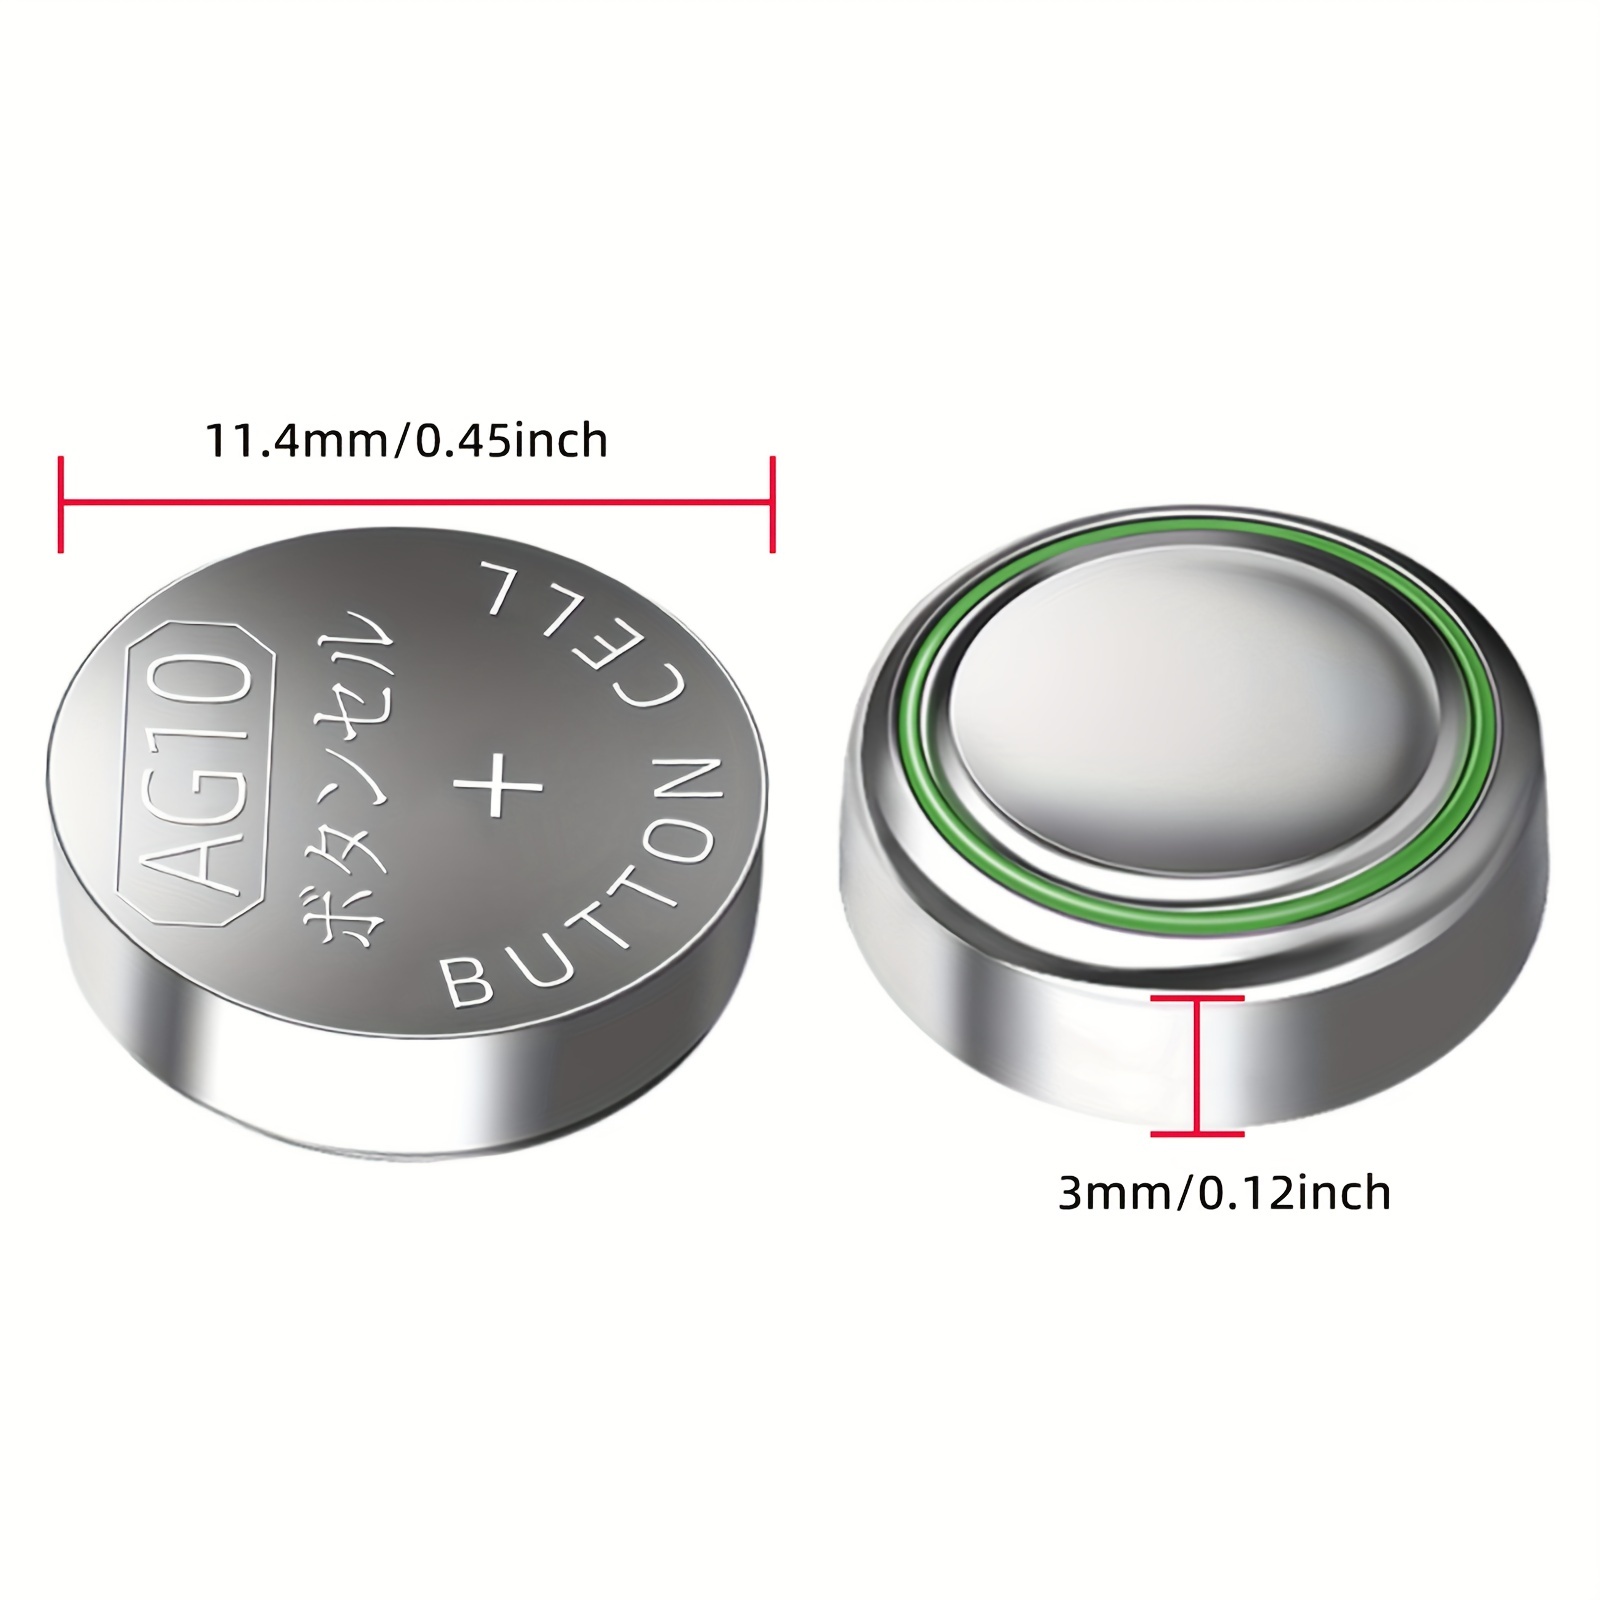 Button Alkaline Cell, Lr1130 Batteries, Coin Thermometer, Ag10 Batteries